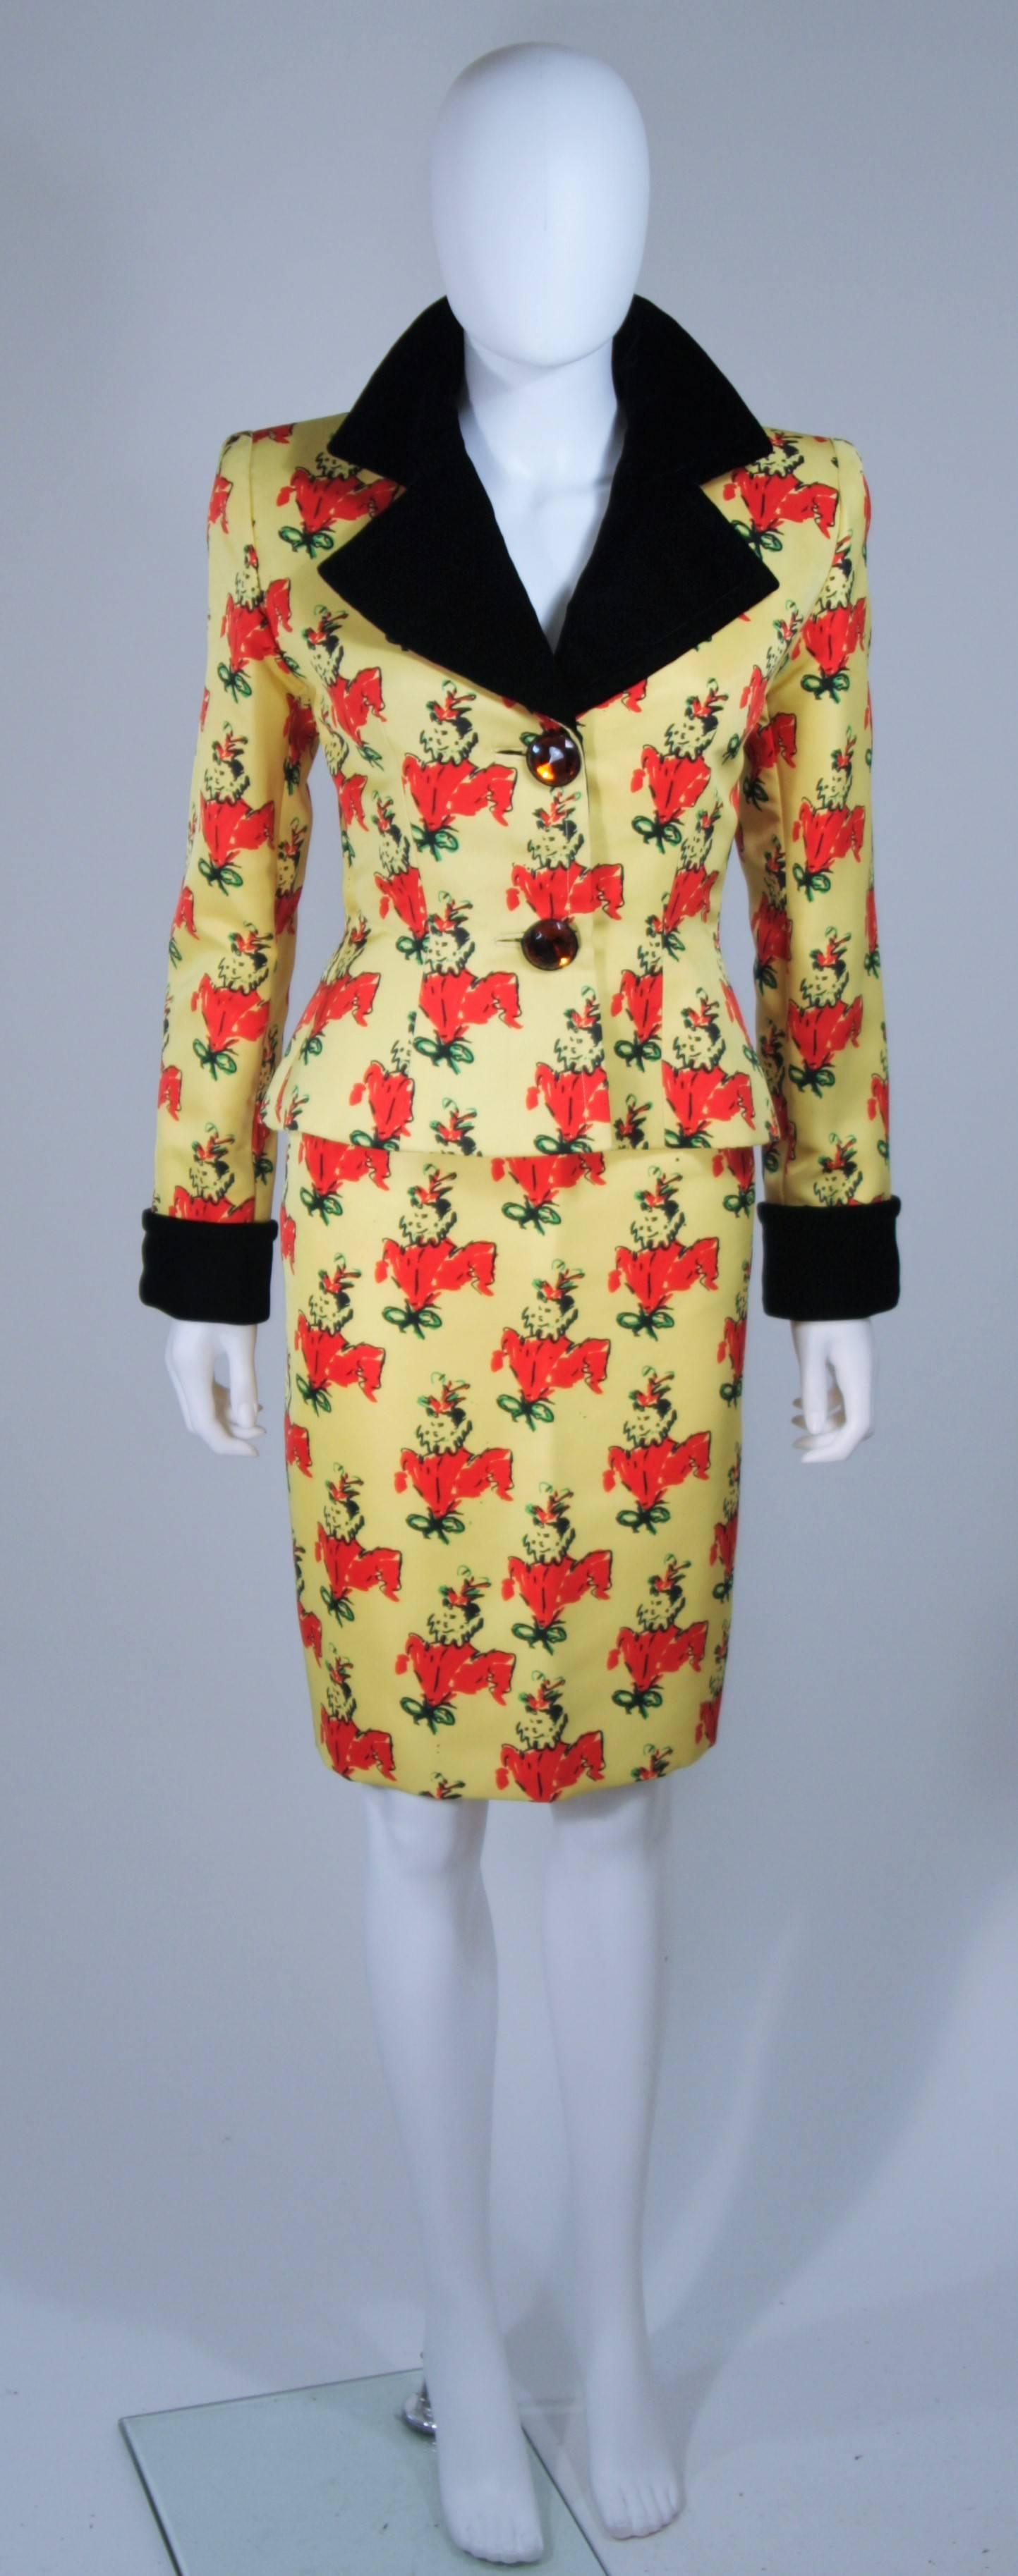  This Givenchy Couture skirt suit is composed of a yellow silk with a portrait pattern print and velvet trim. The jacket has a slight peplum style and large citrine hue rhinestone button closures, at the center front. The pencil style skirt has a